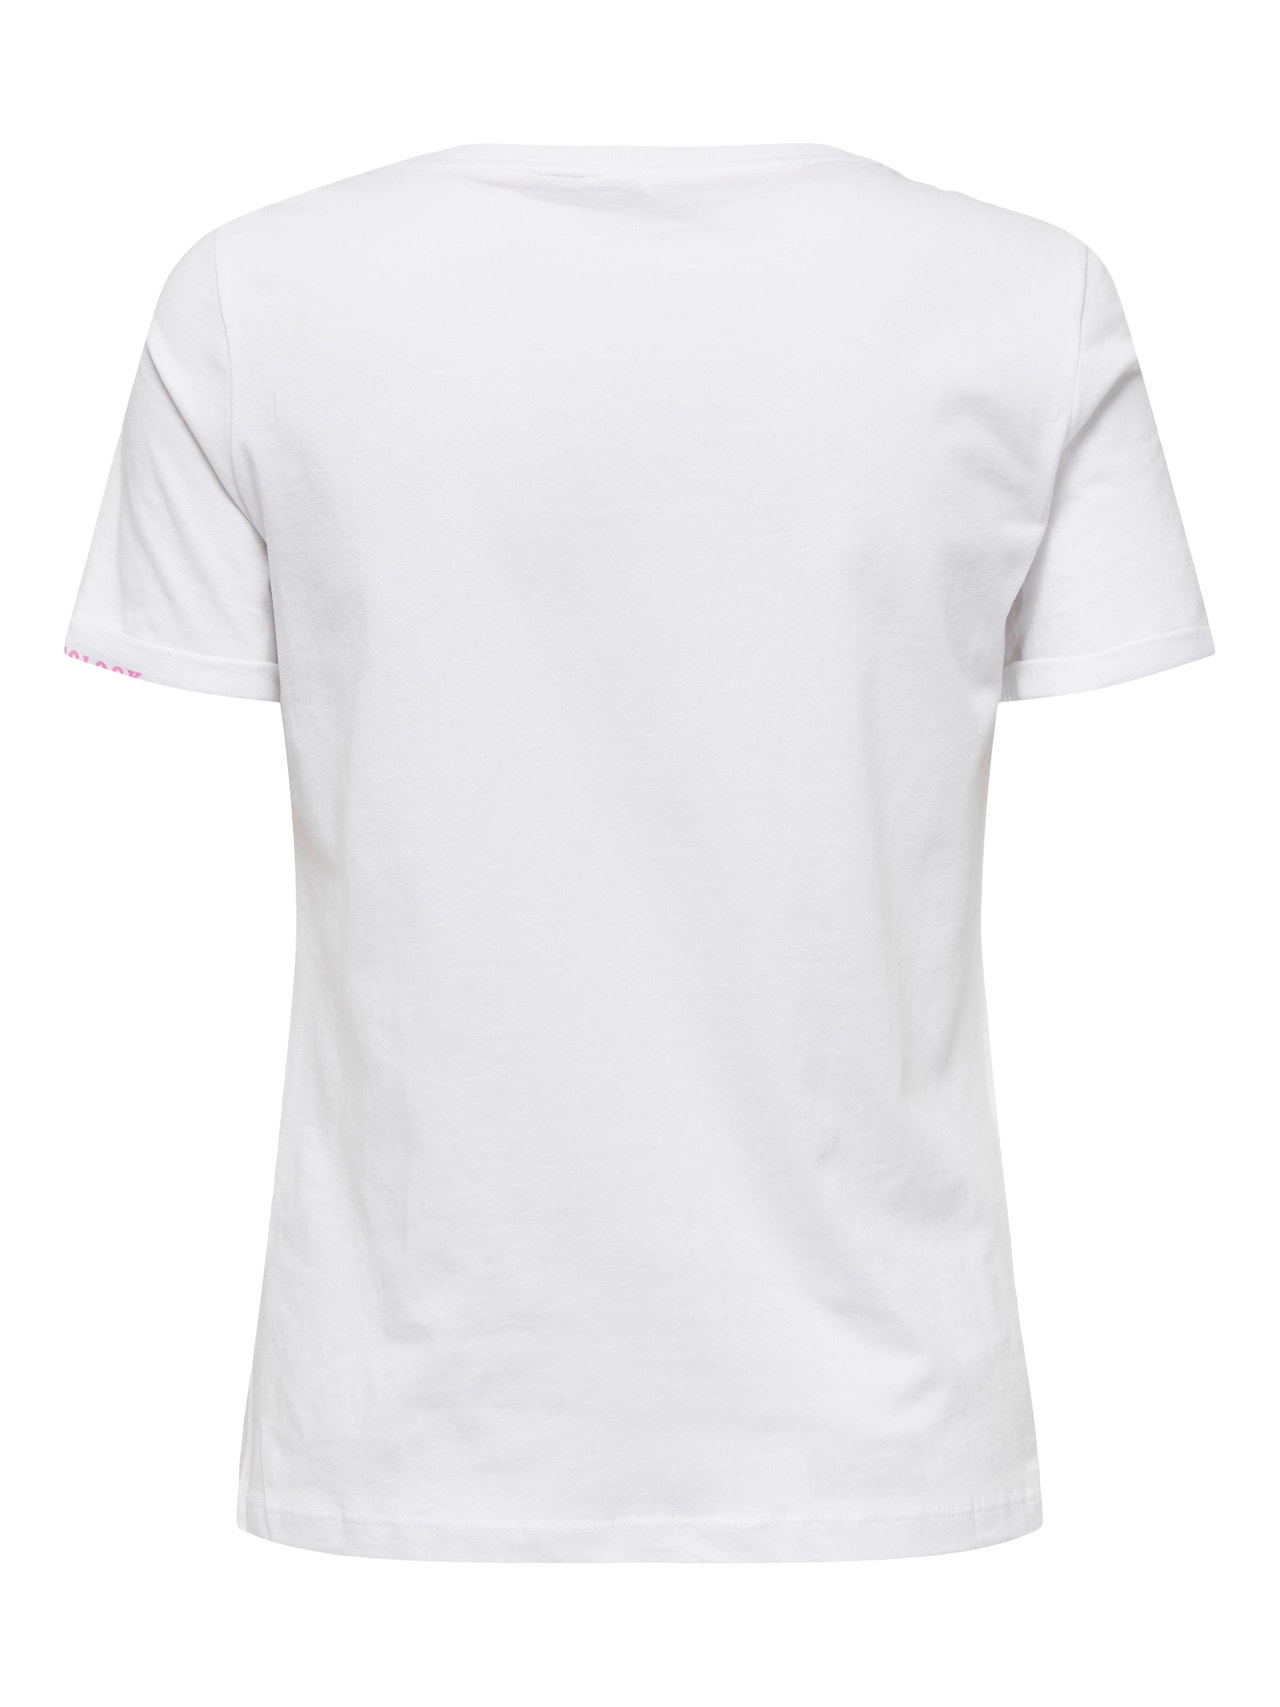 ONLY o-neck t-shirt -Bright White - 15291465